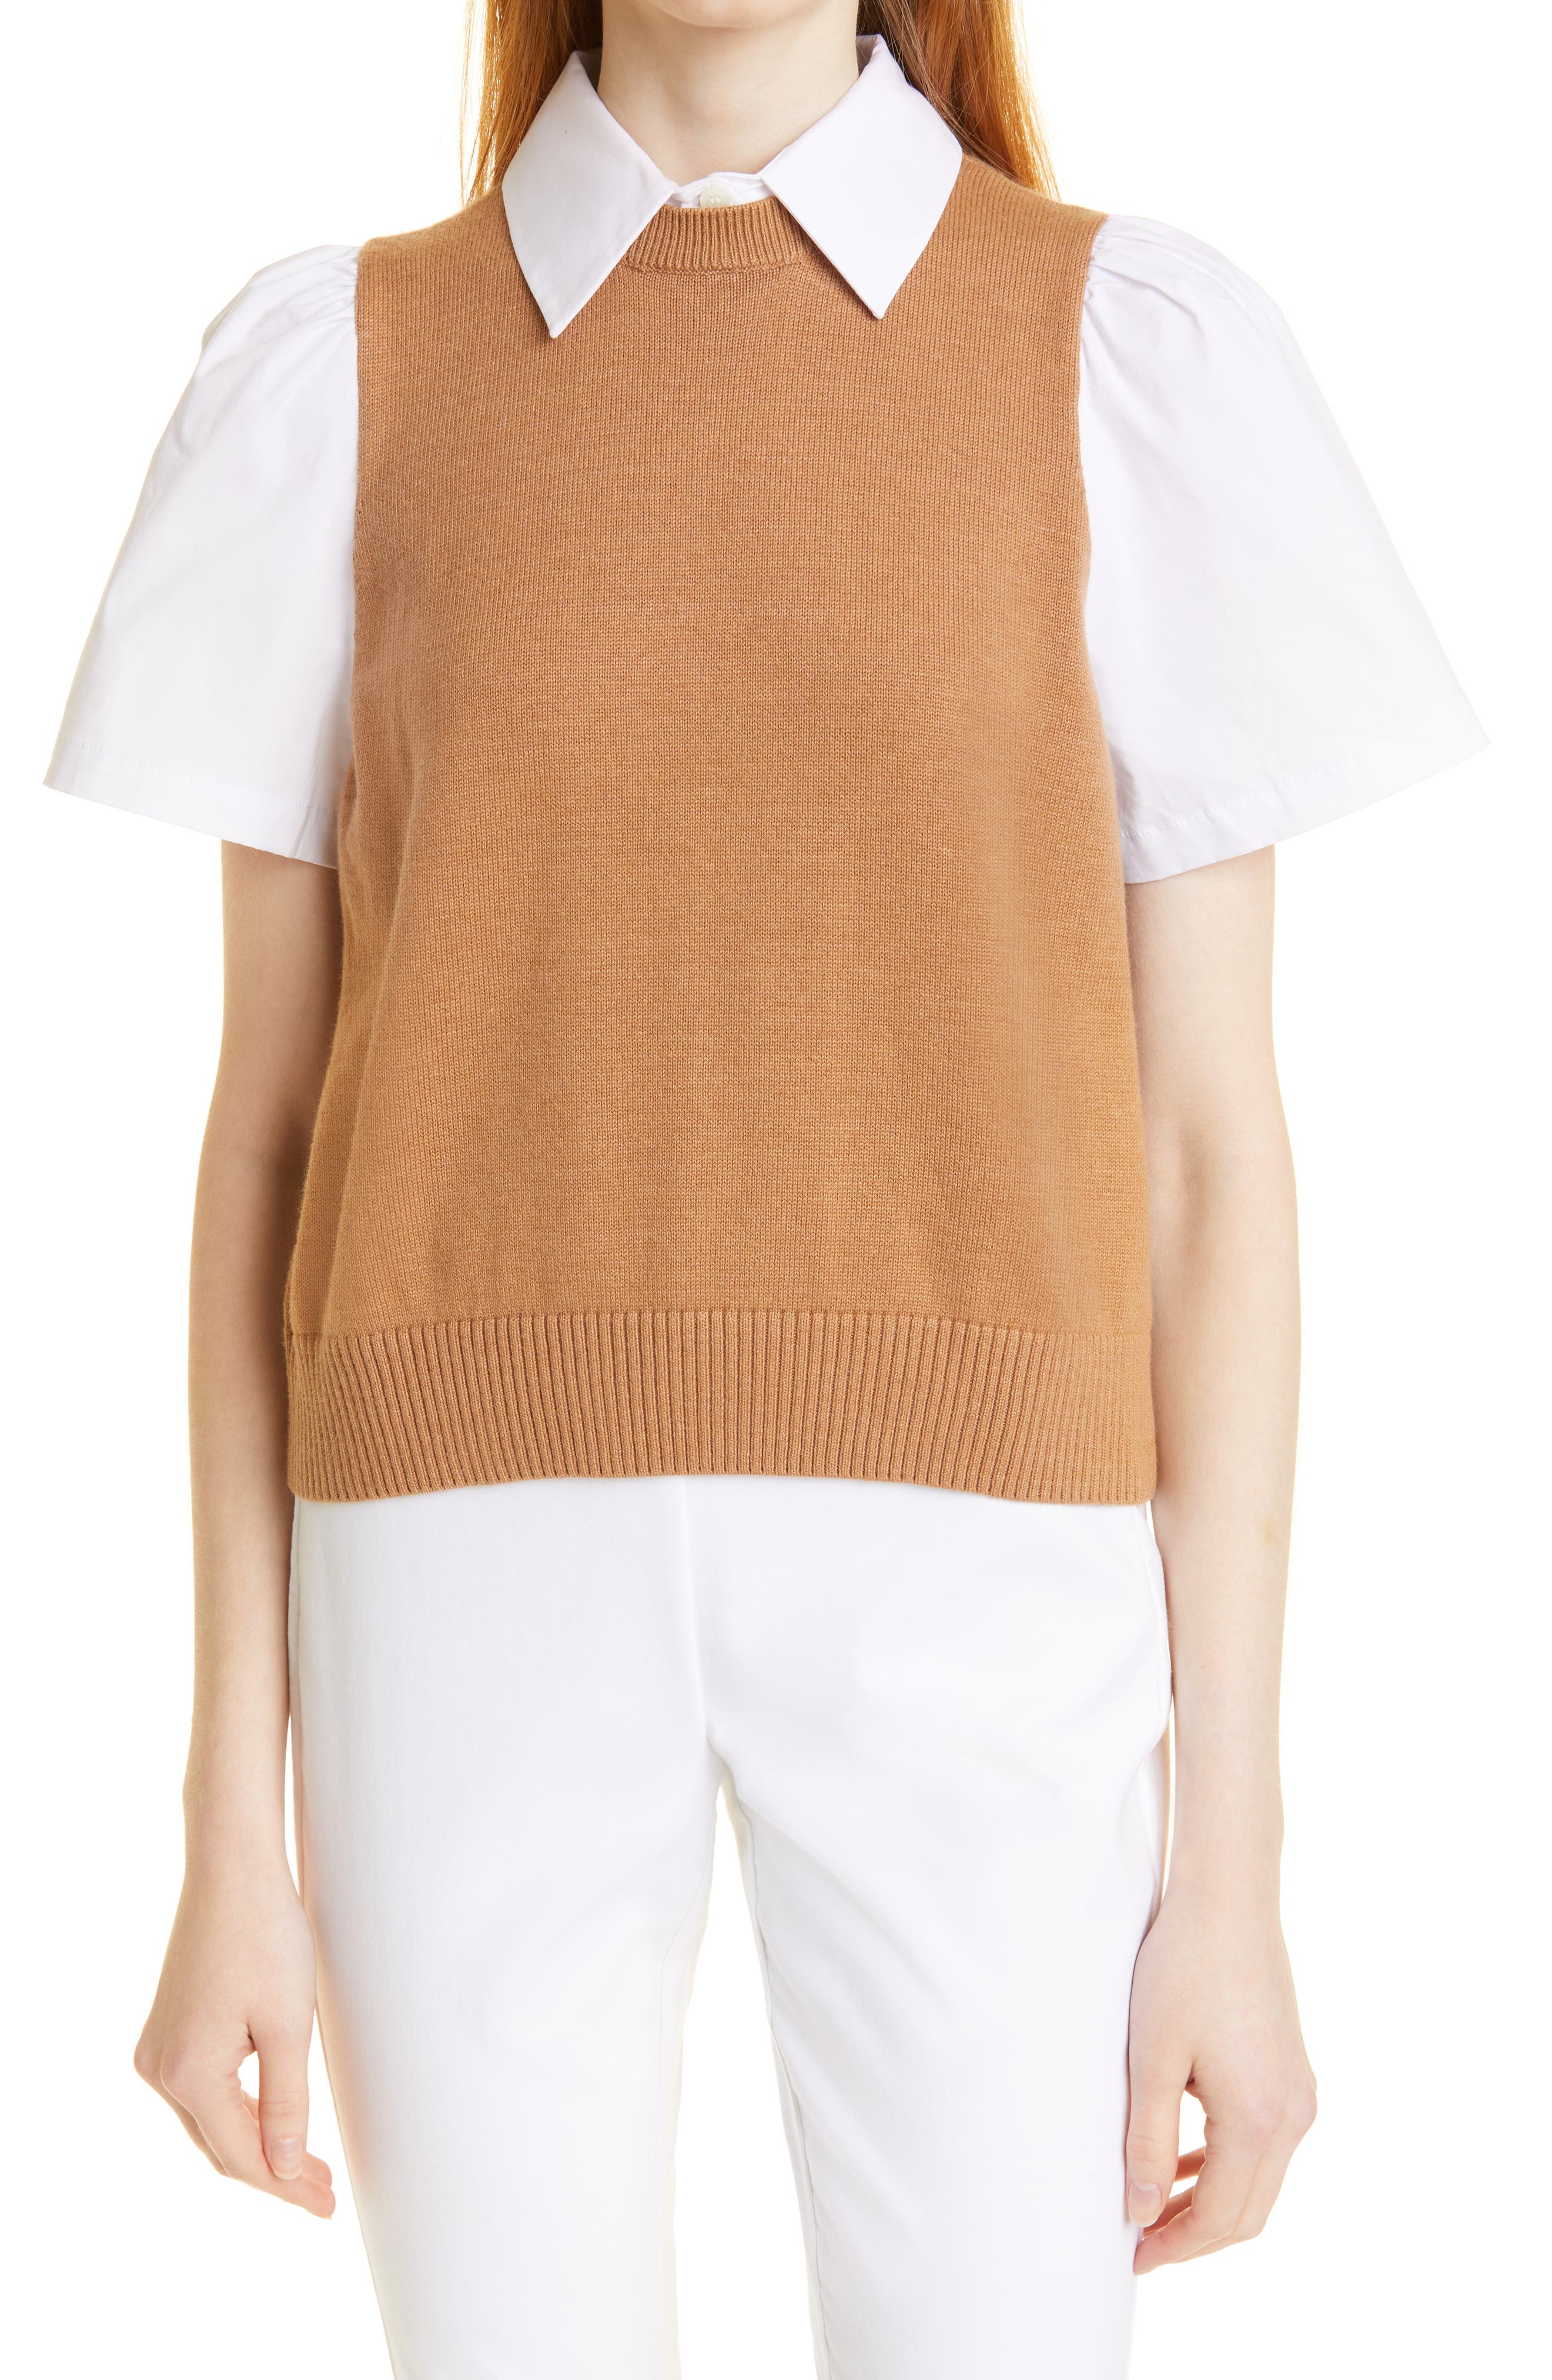 STAUD Arya Detachable Collar Mixed Media Top in Tan/White at Nordstrom, Size X-Small